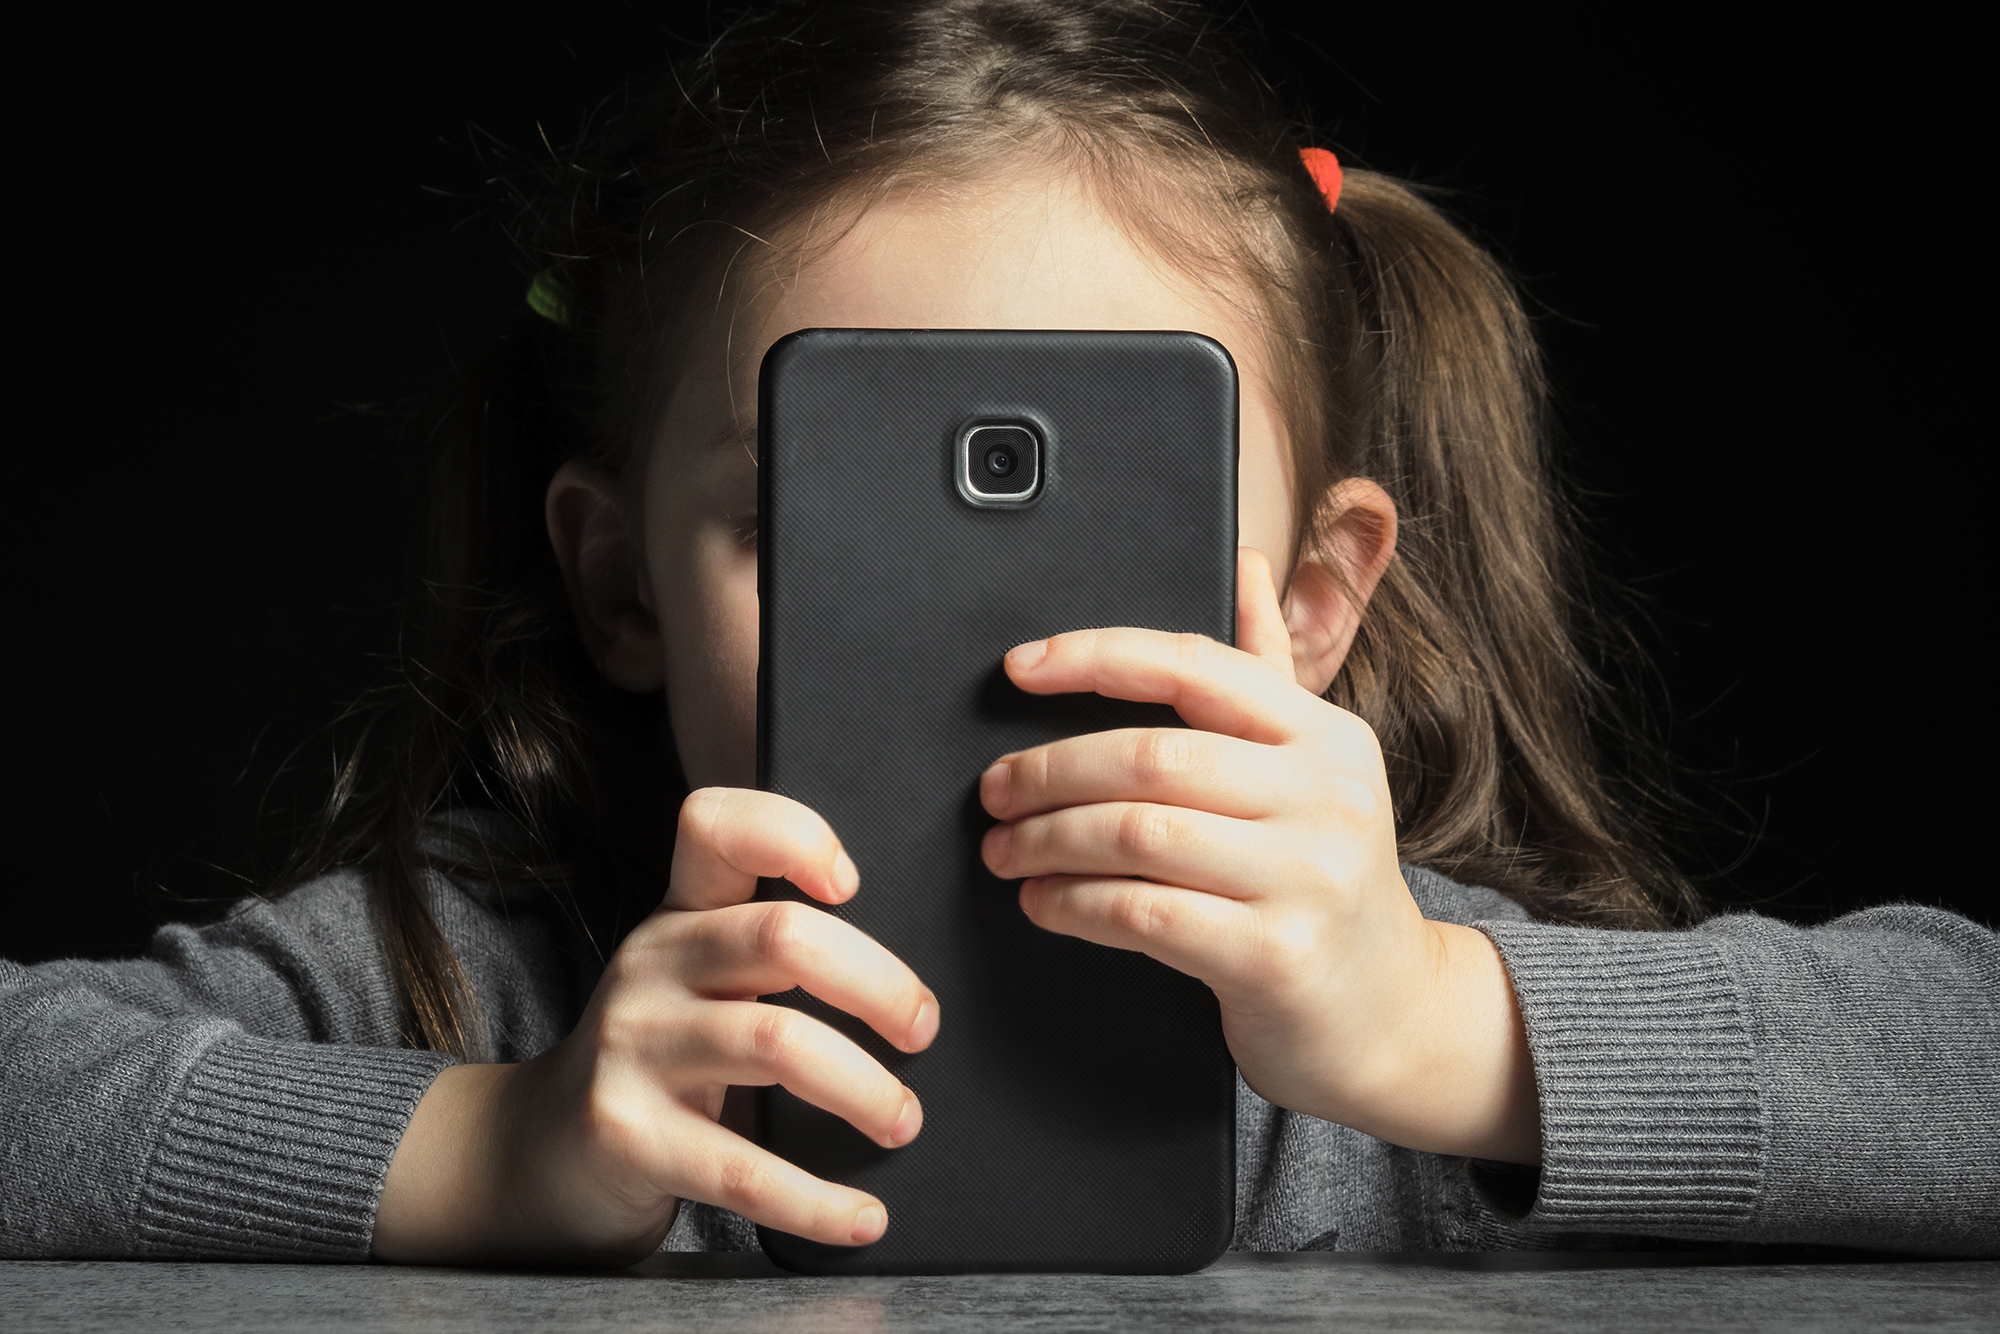 9 Smartphone Safety Rules & Strategies for Kids